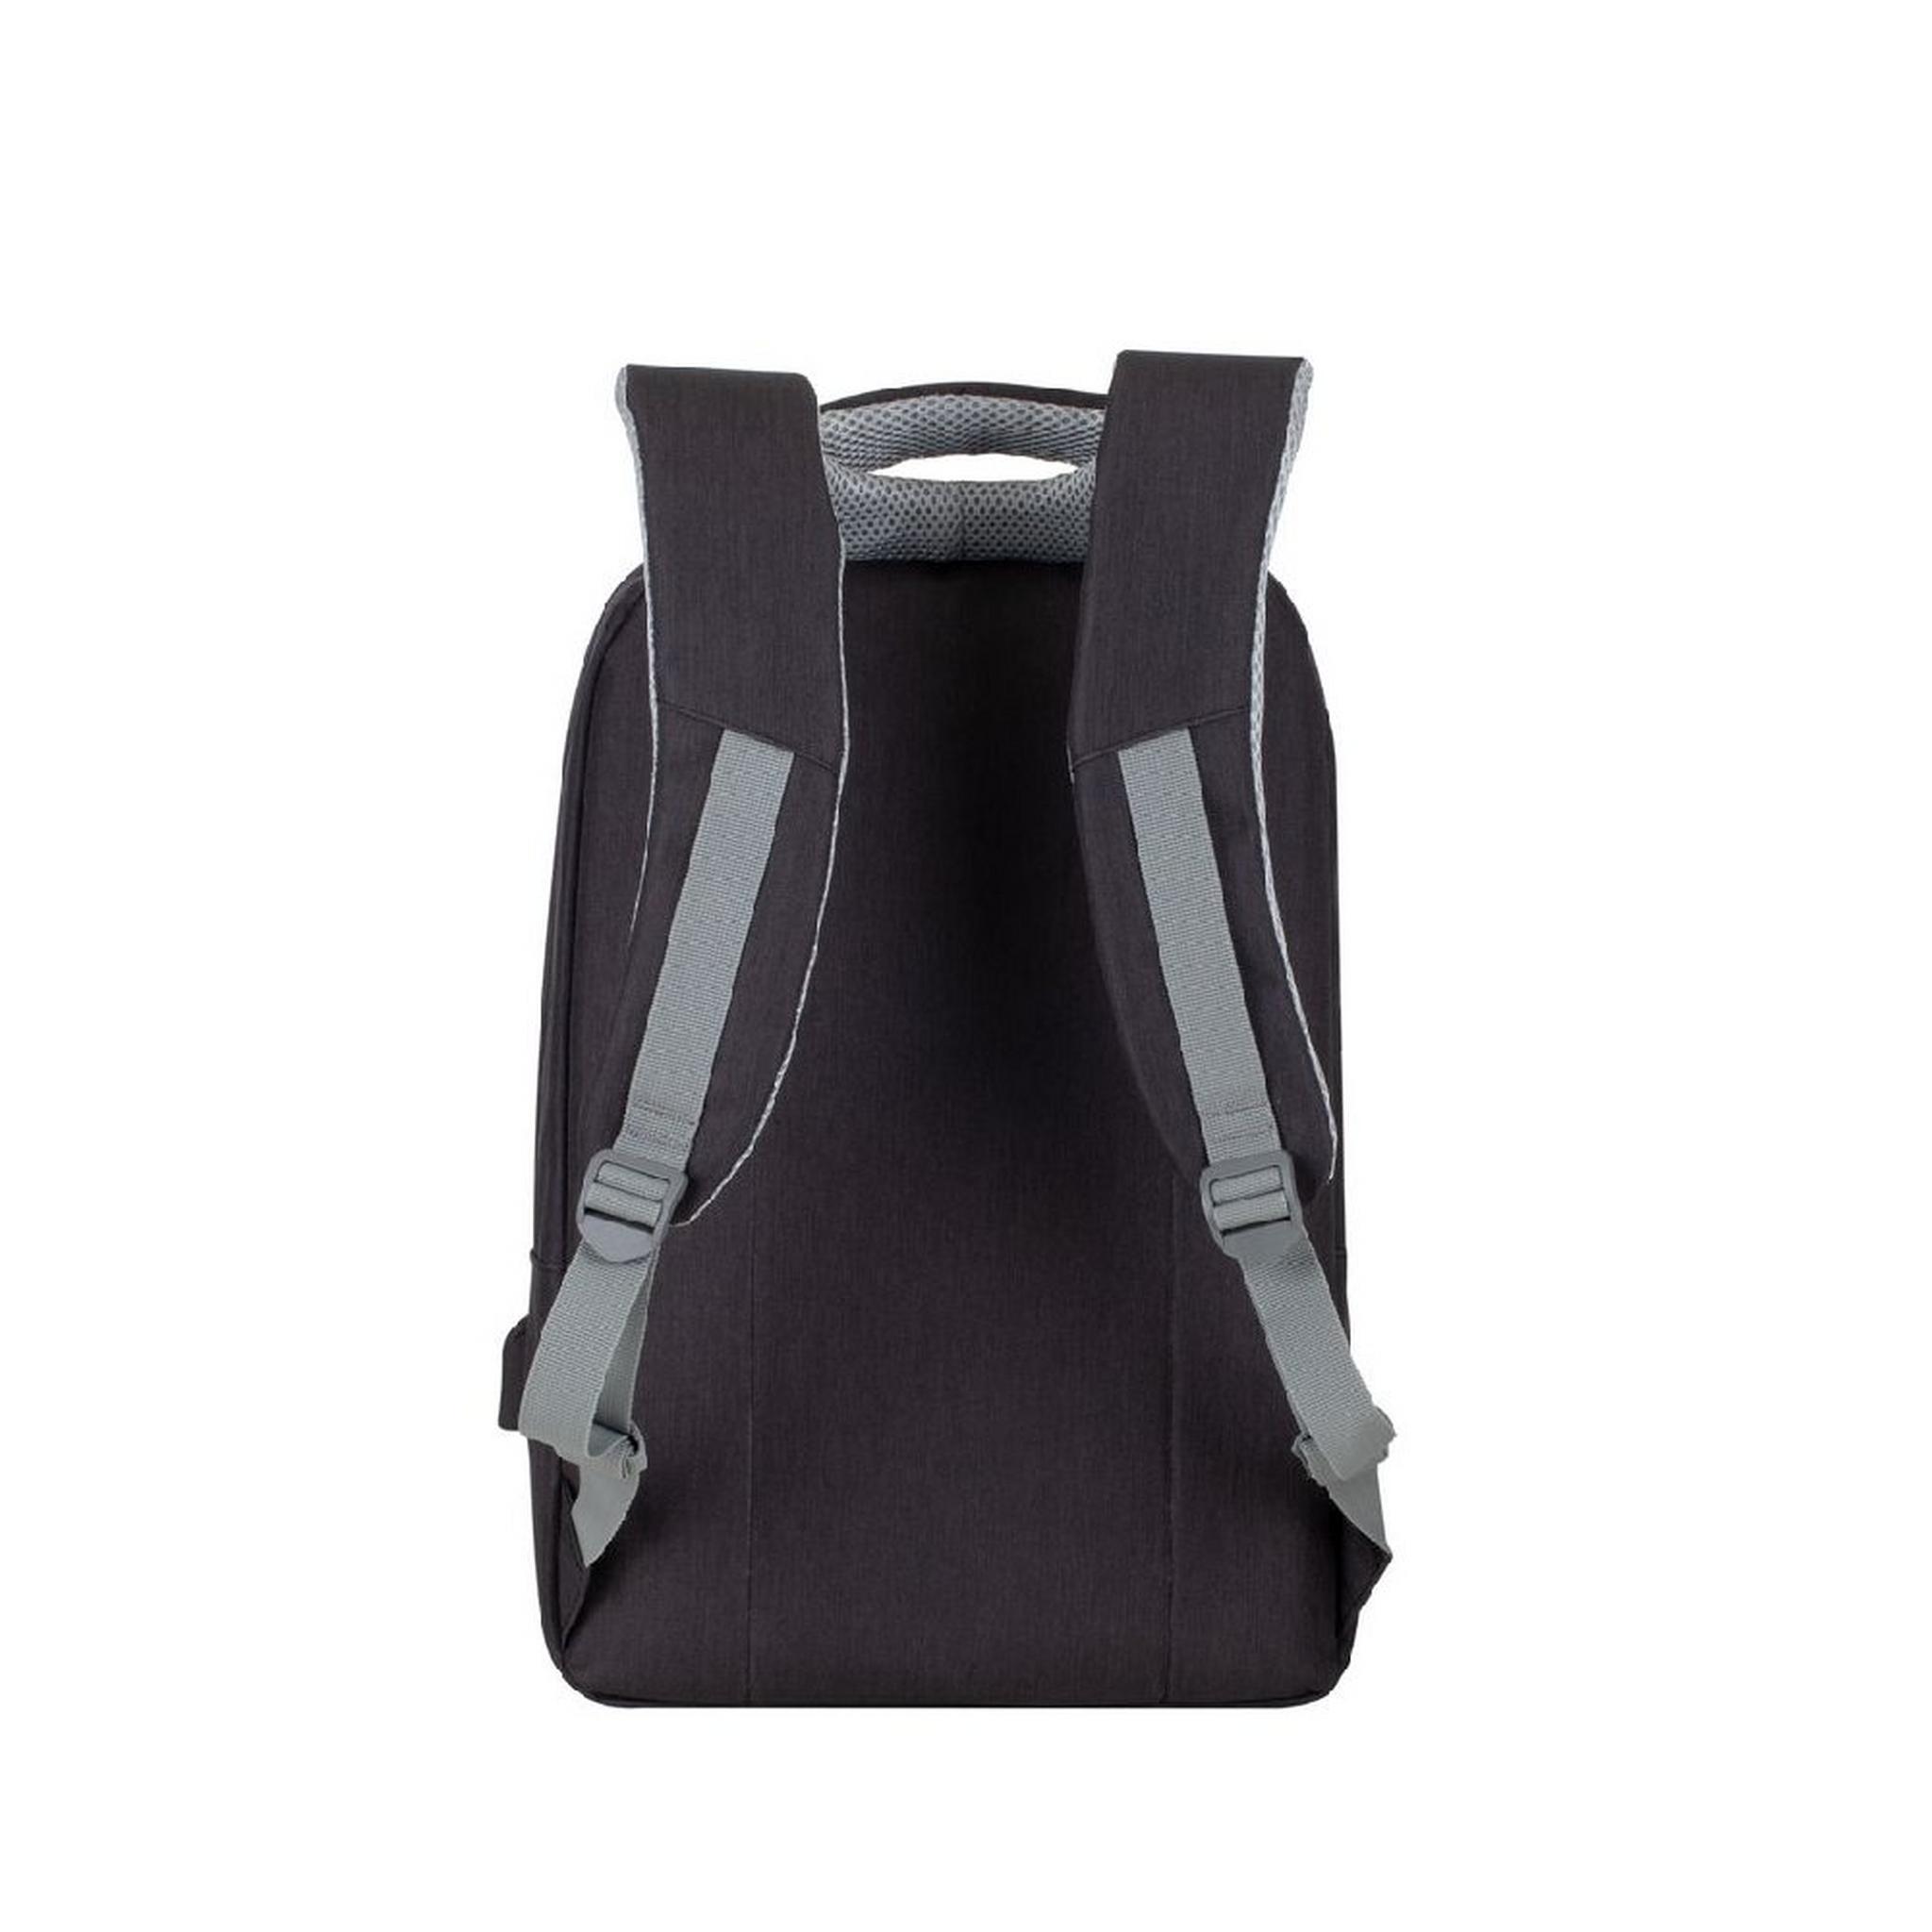 RIVACASE Prater Anti-Theft 15.6" Laptop Backpack - Black